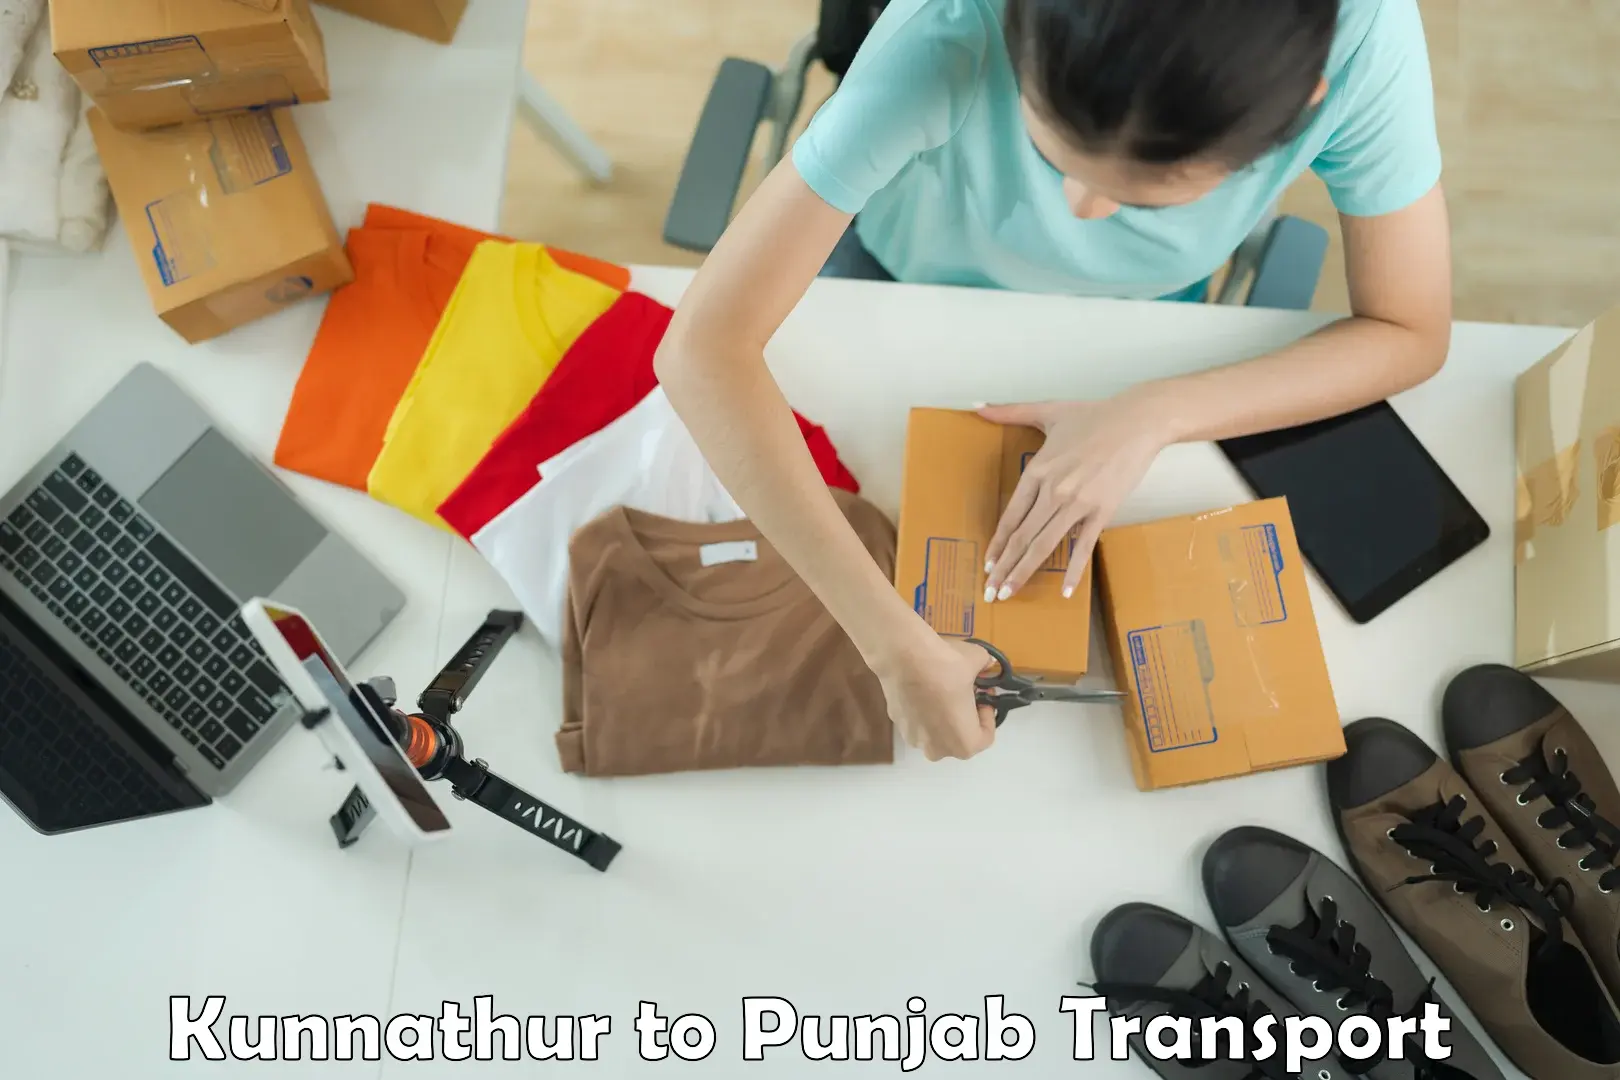 Container transport service Kunnathur to Amritsar